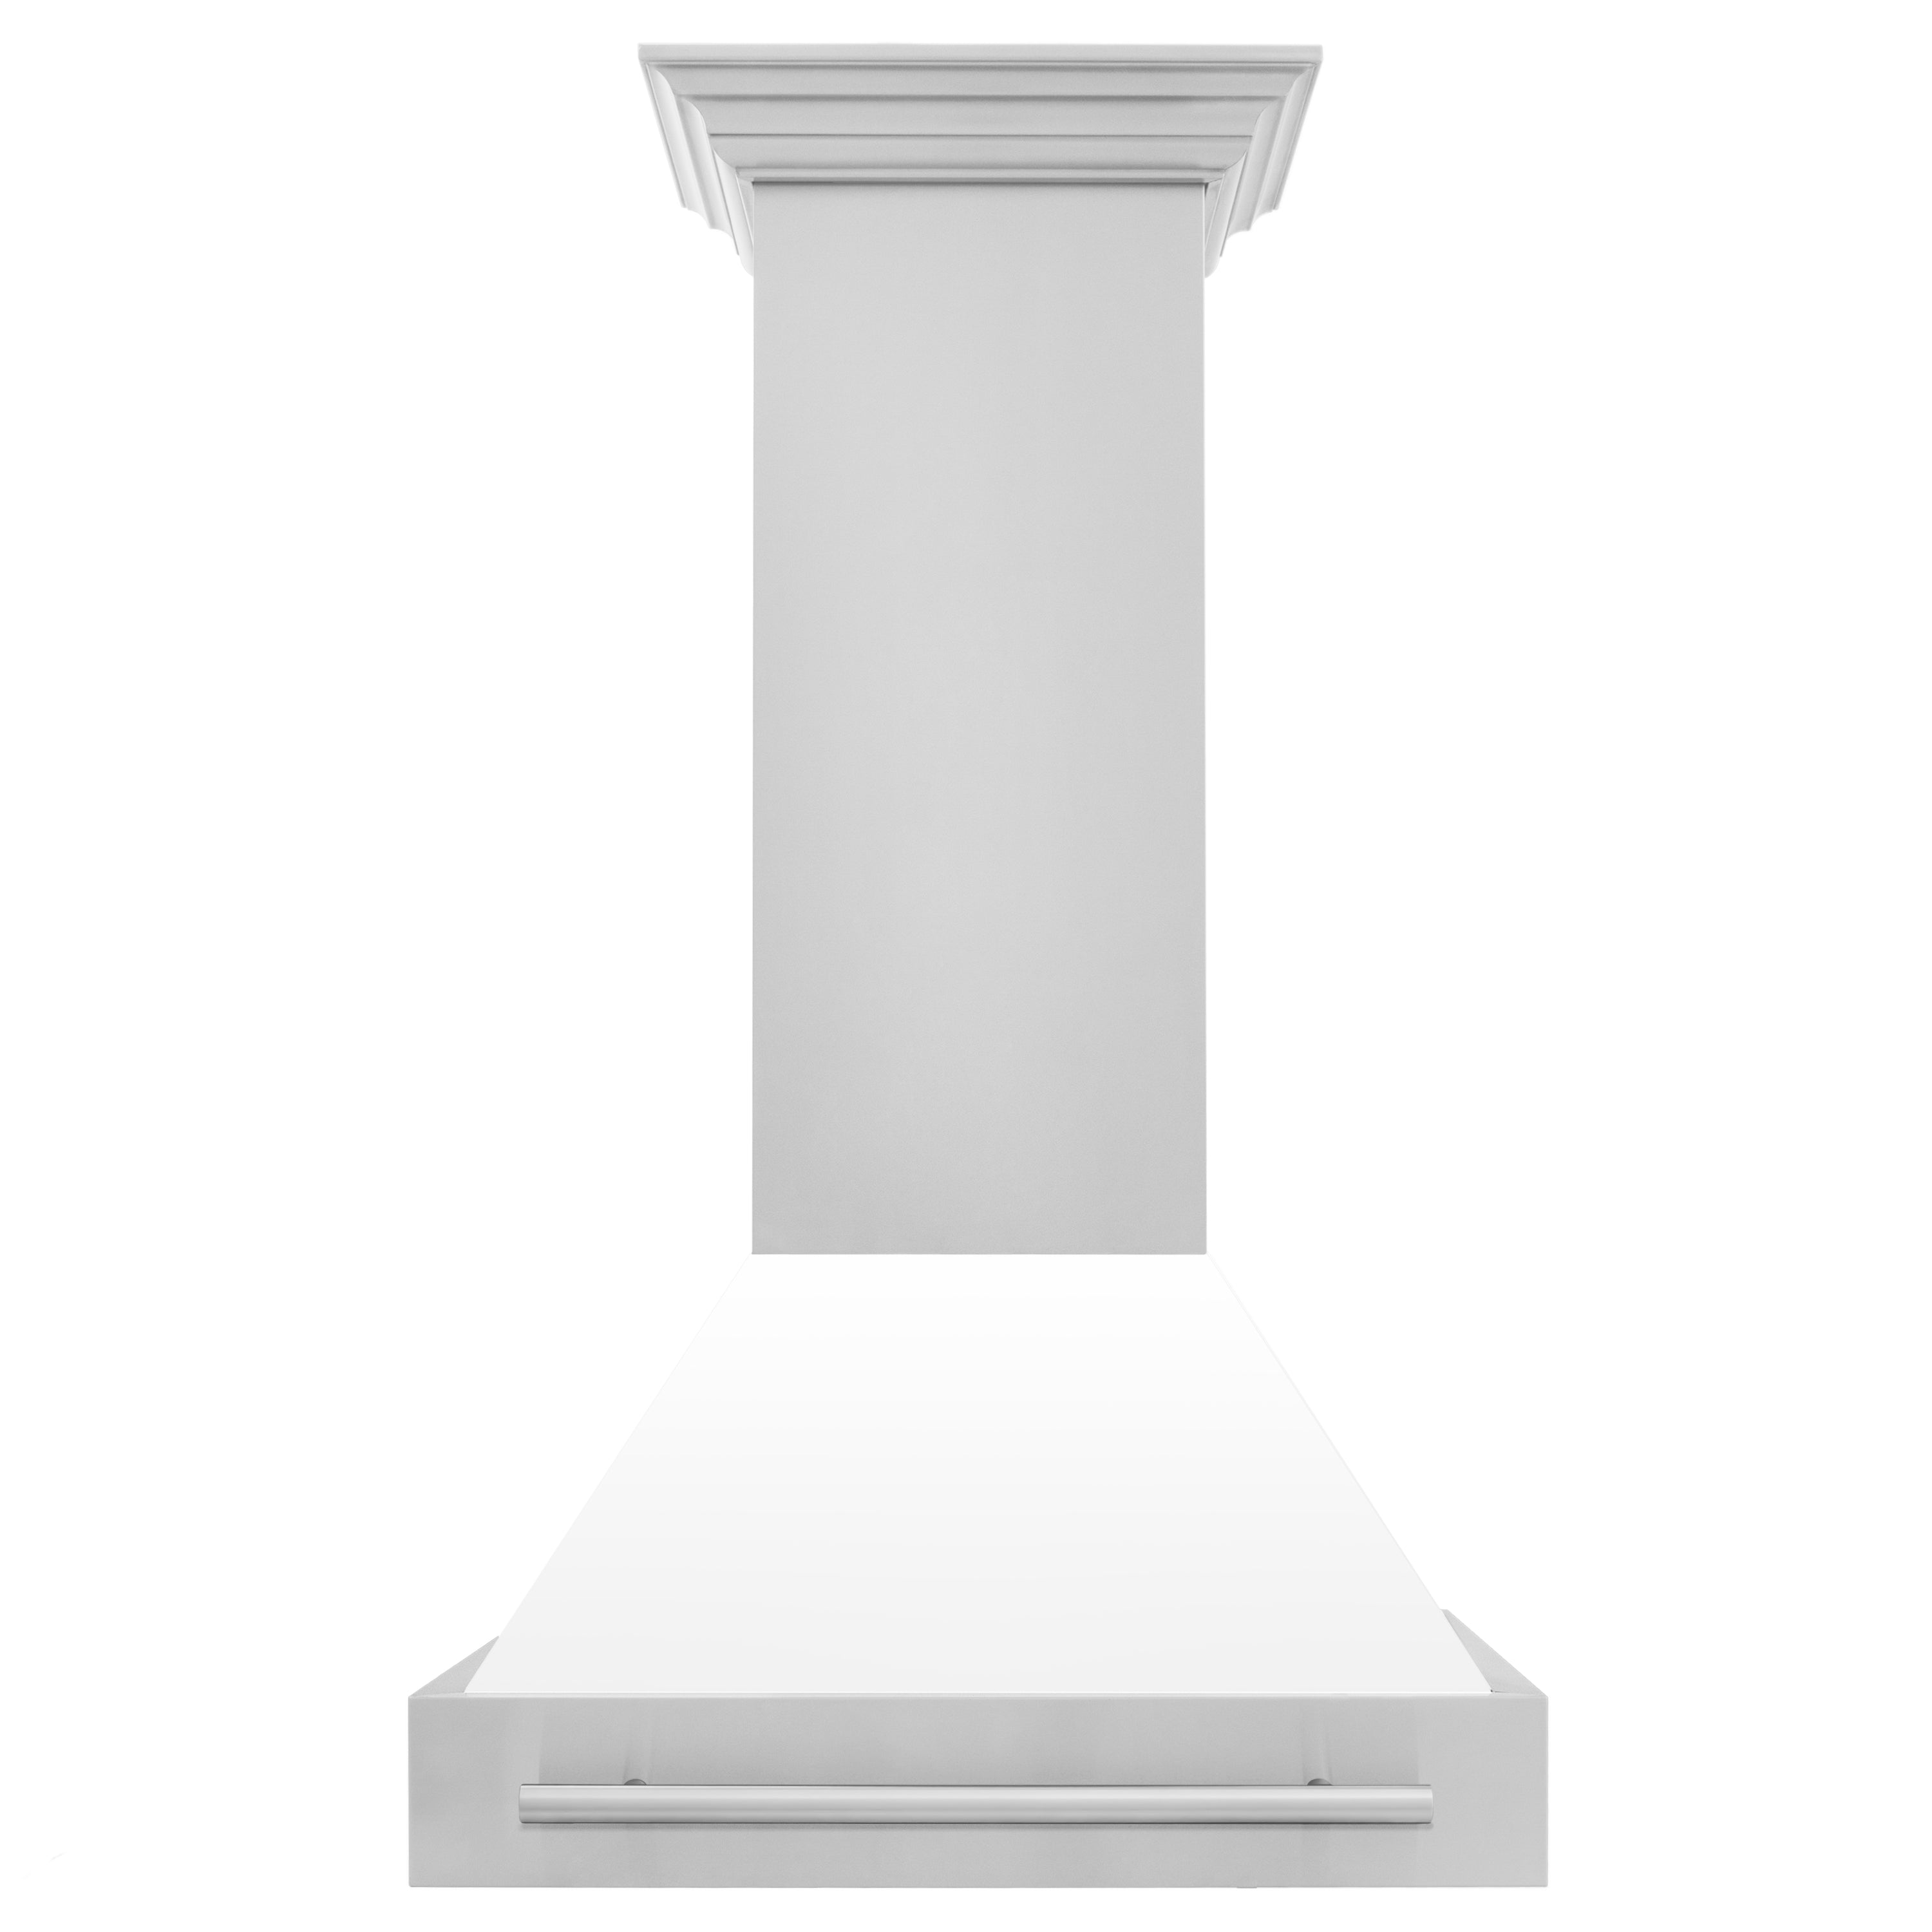 ZLINE 30" Stainless Steel Wall Mount Range Hood with White Matte Shell and Stainless Steel Handle (8654STX-WM-30)